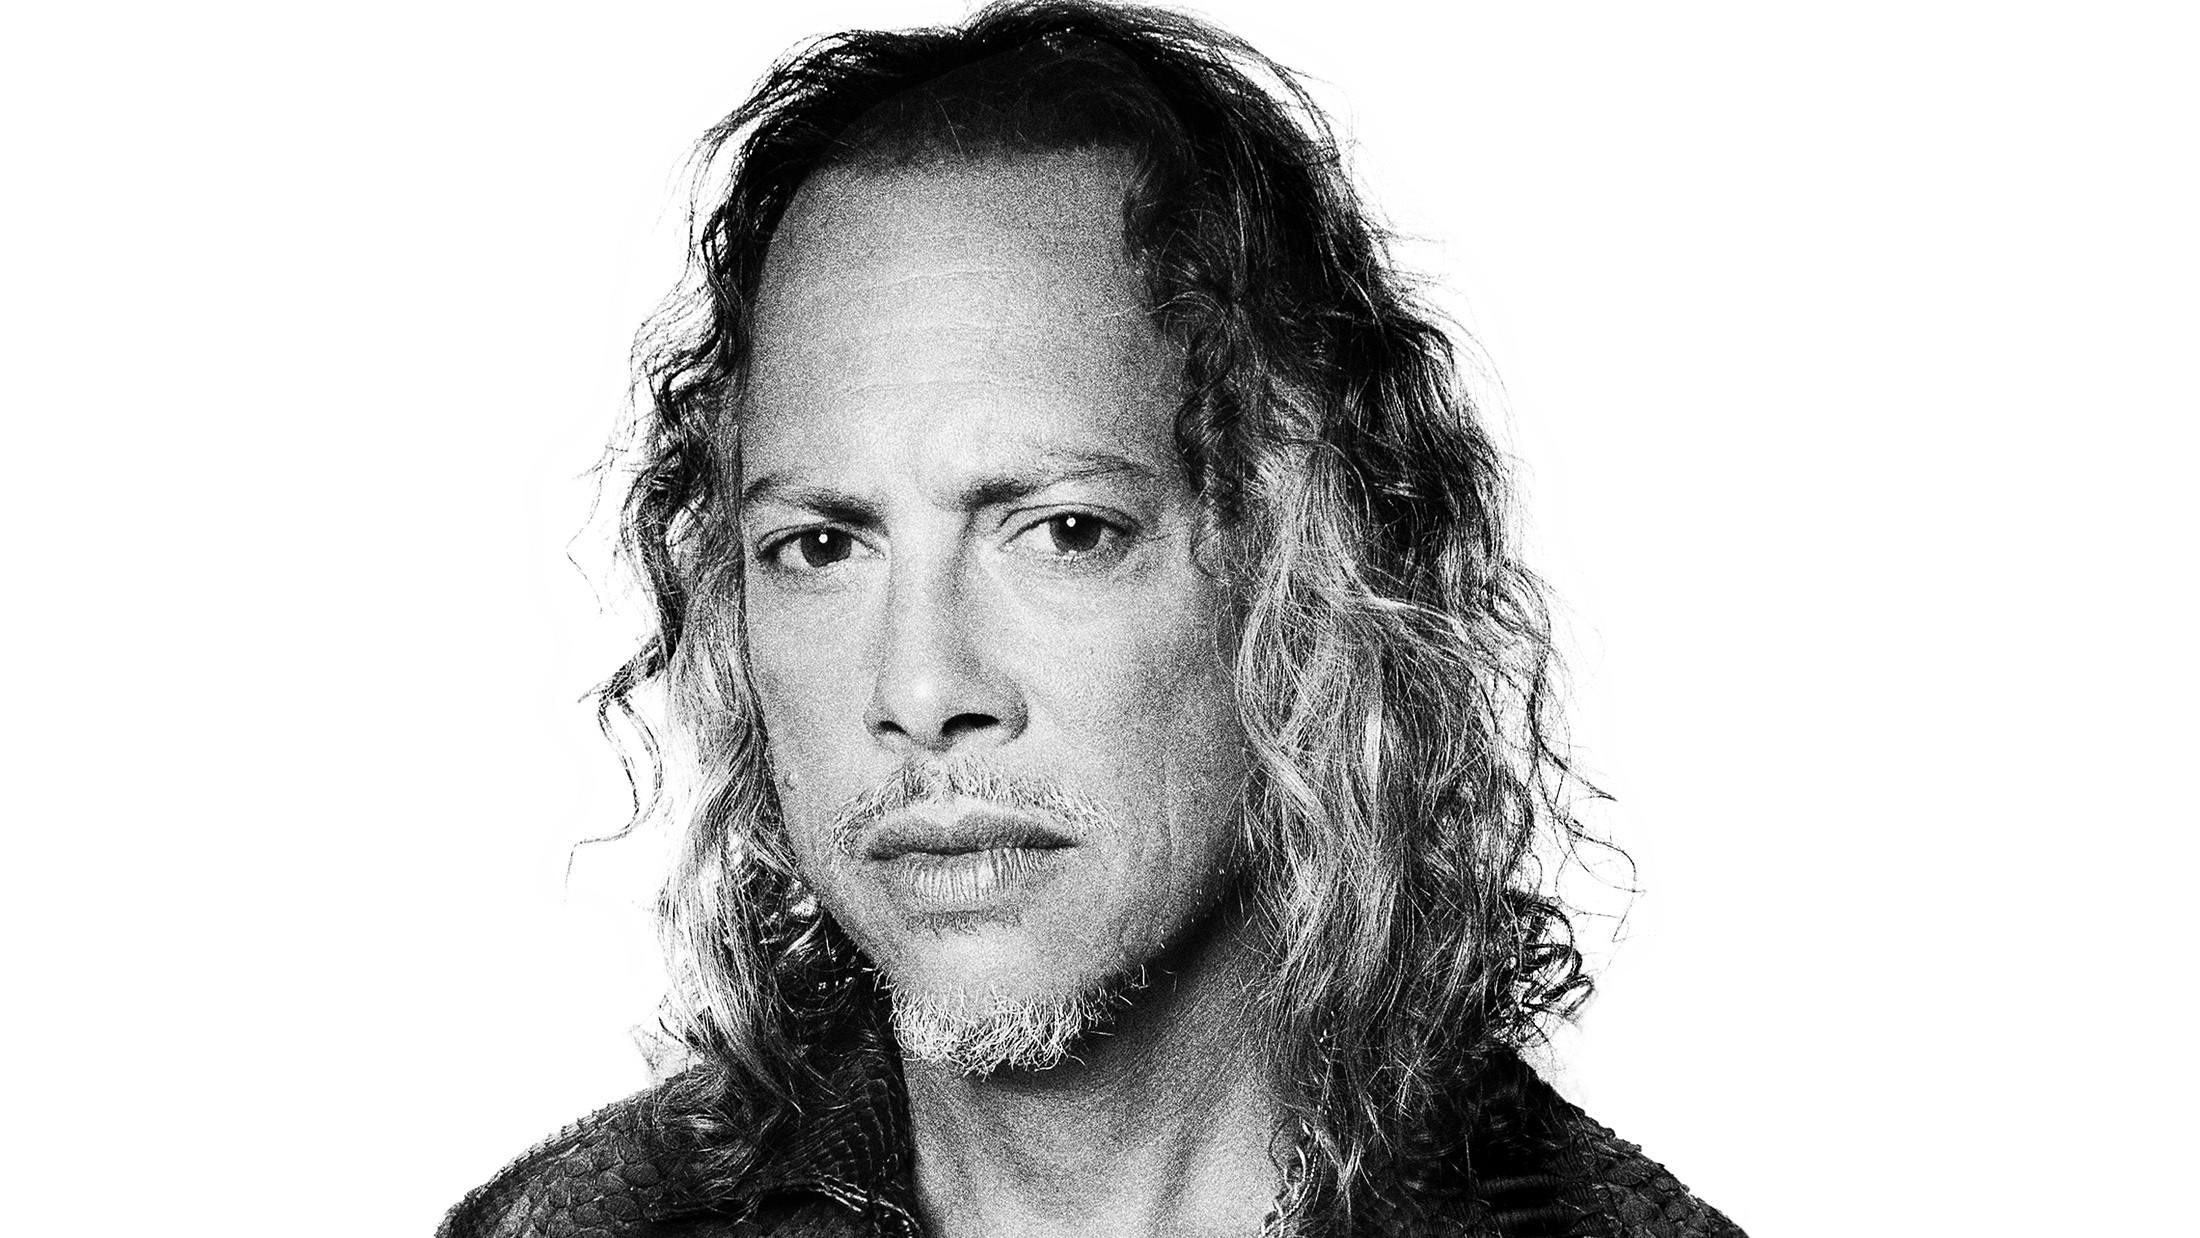 Metallica's Kirk Hammett Reflects On The Black Album: "Those Songs Feel As Recent And Contemporary As Ever To Me"